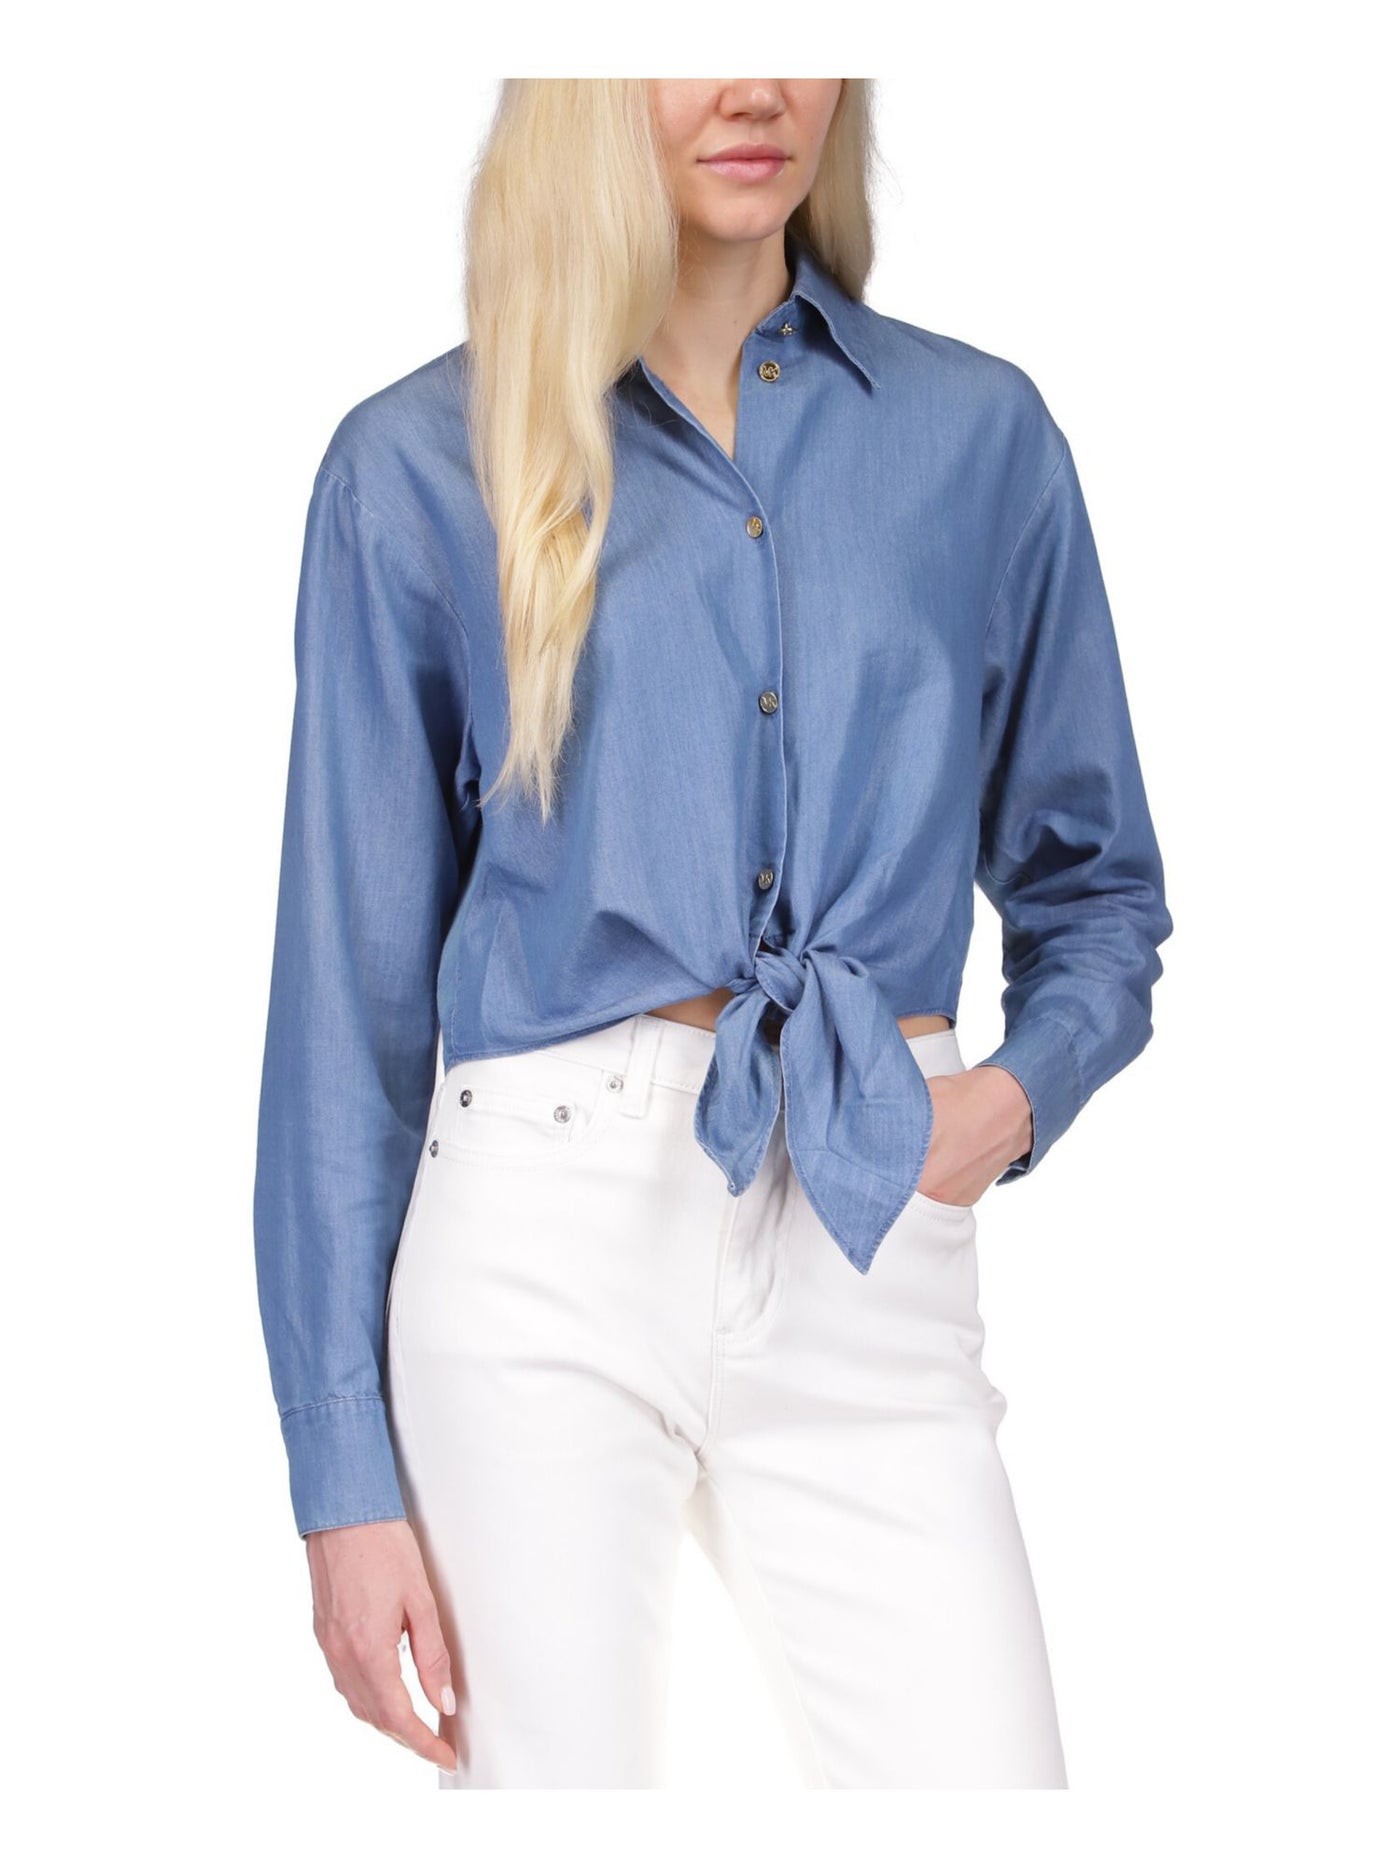 MICHAEL MICHAEL KORS Womens Blue Cuffed Sleeve Collared Button Up Top S